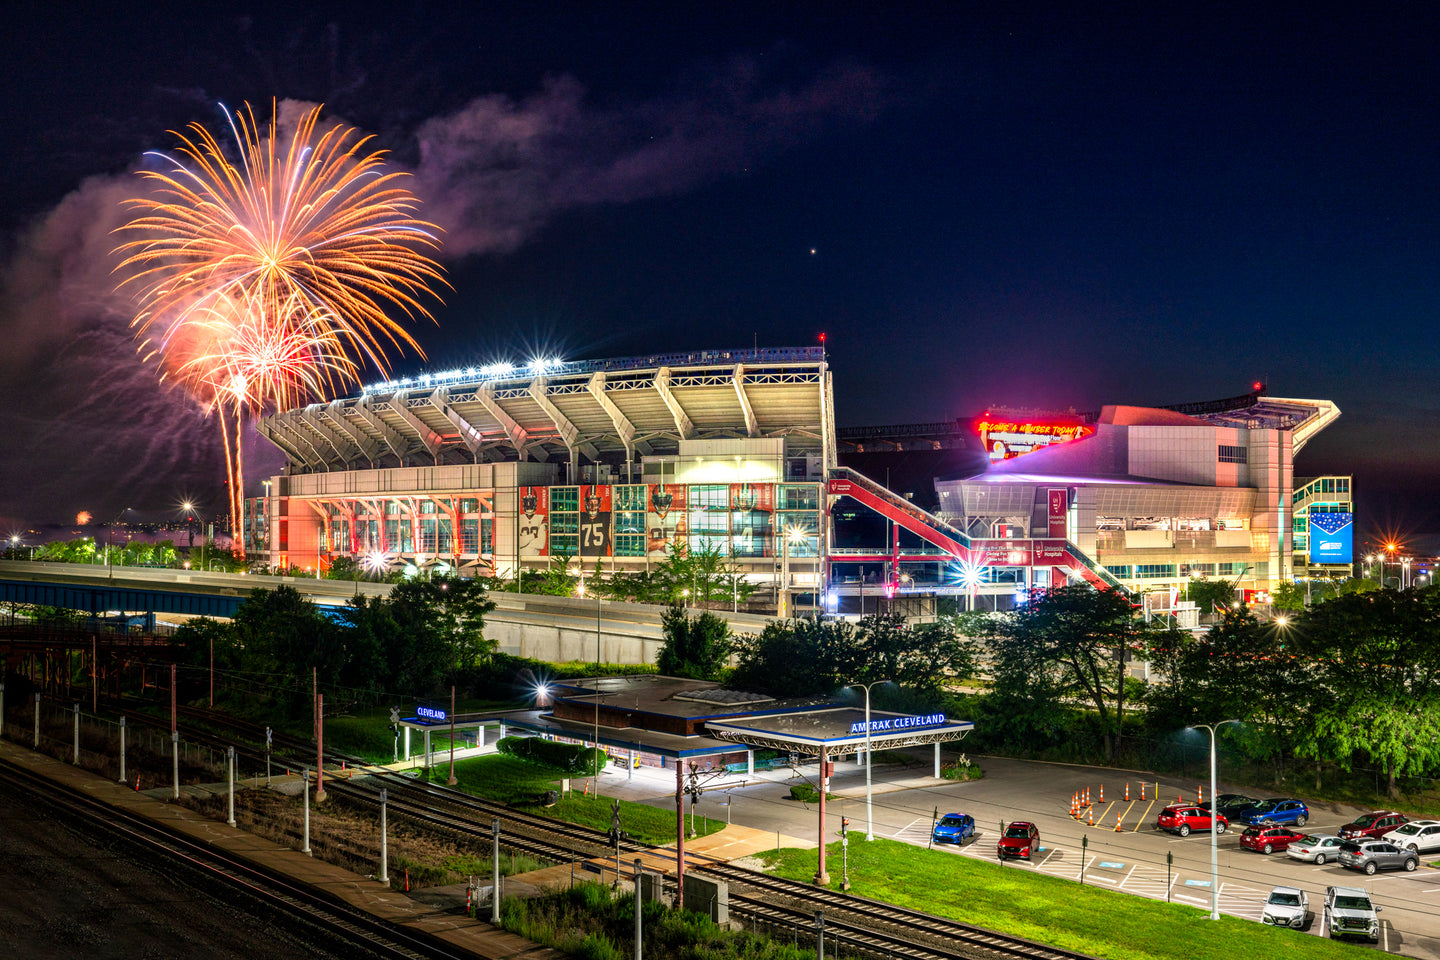 Independence Day - Cleveland Browns Stadium